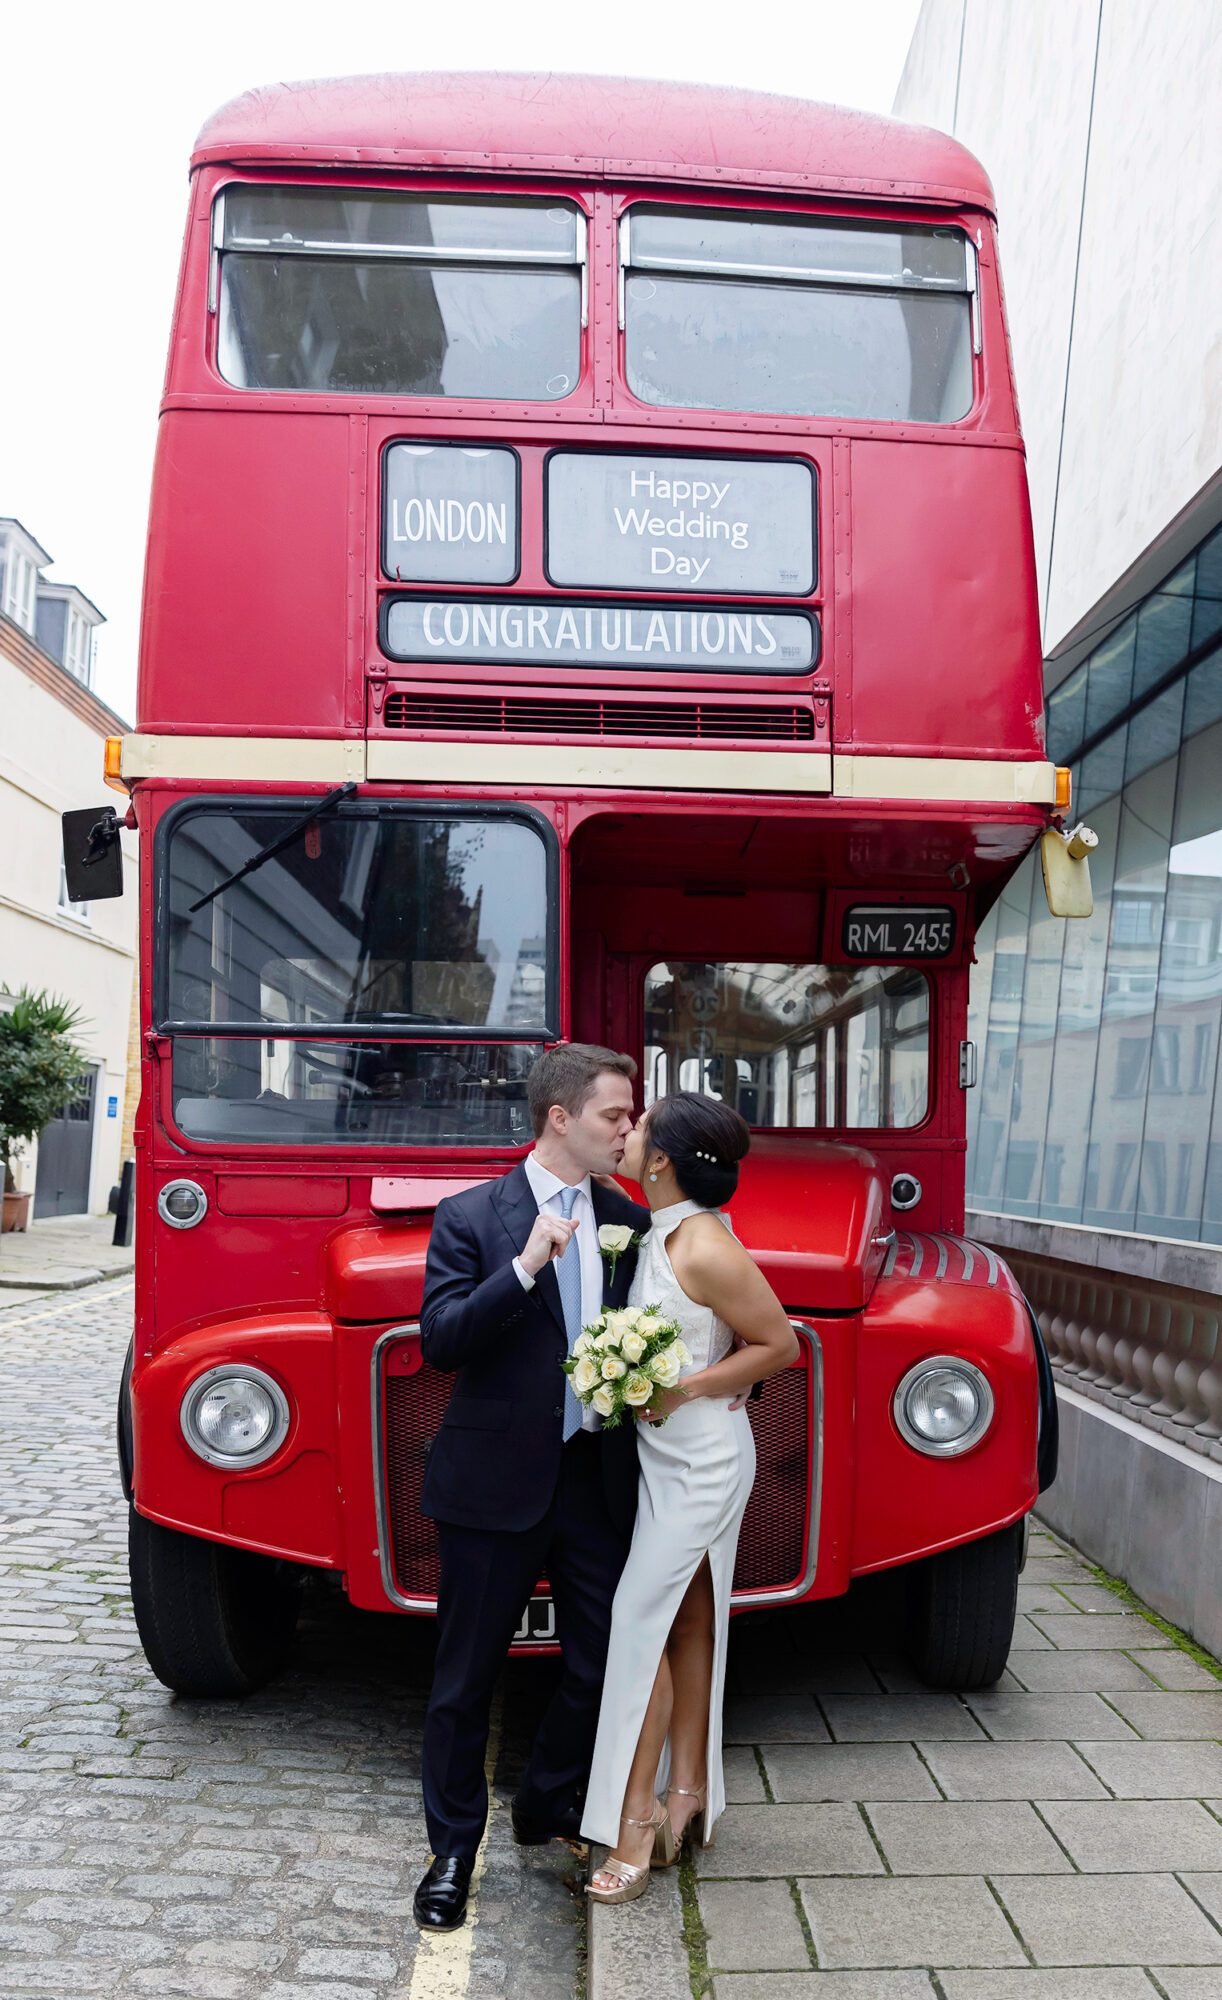 Wedding bus and bride and groom Old Marylebone Town Hall